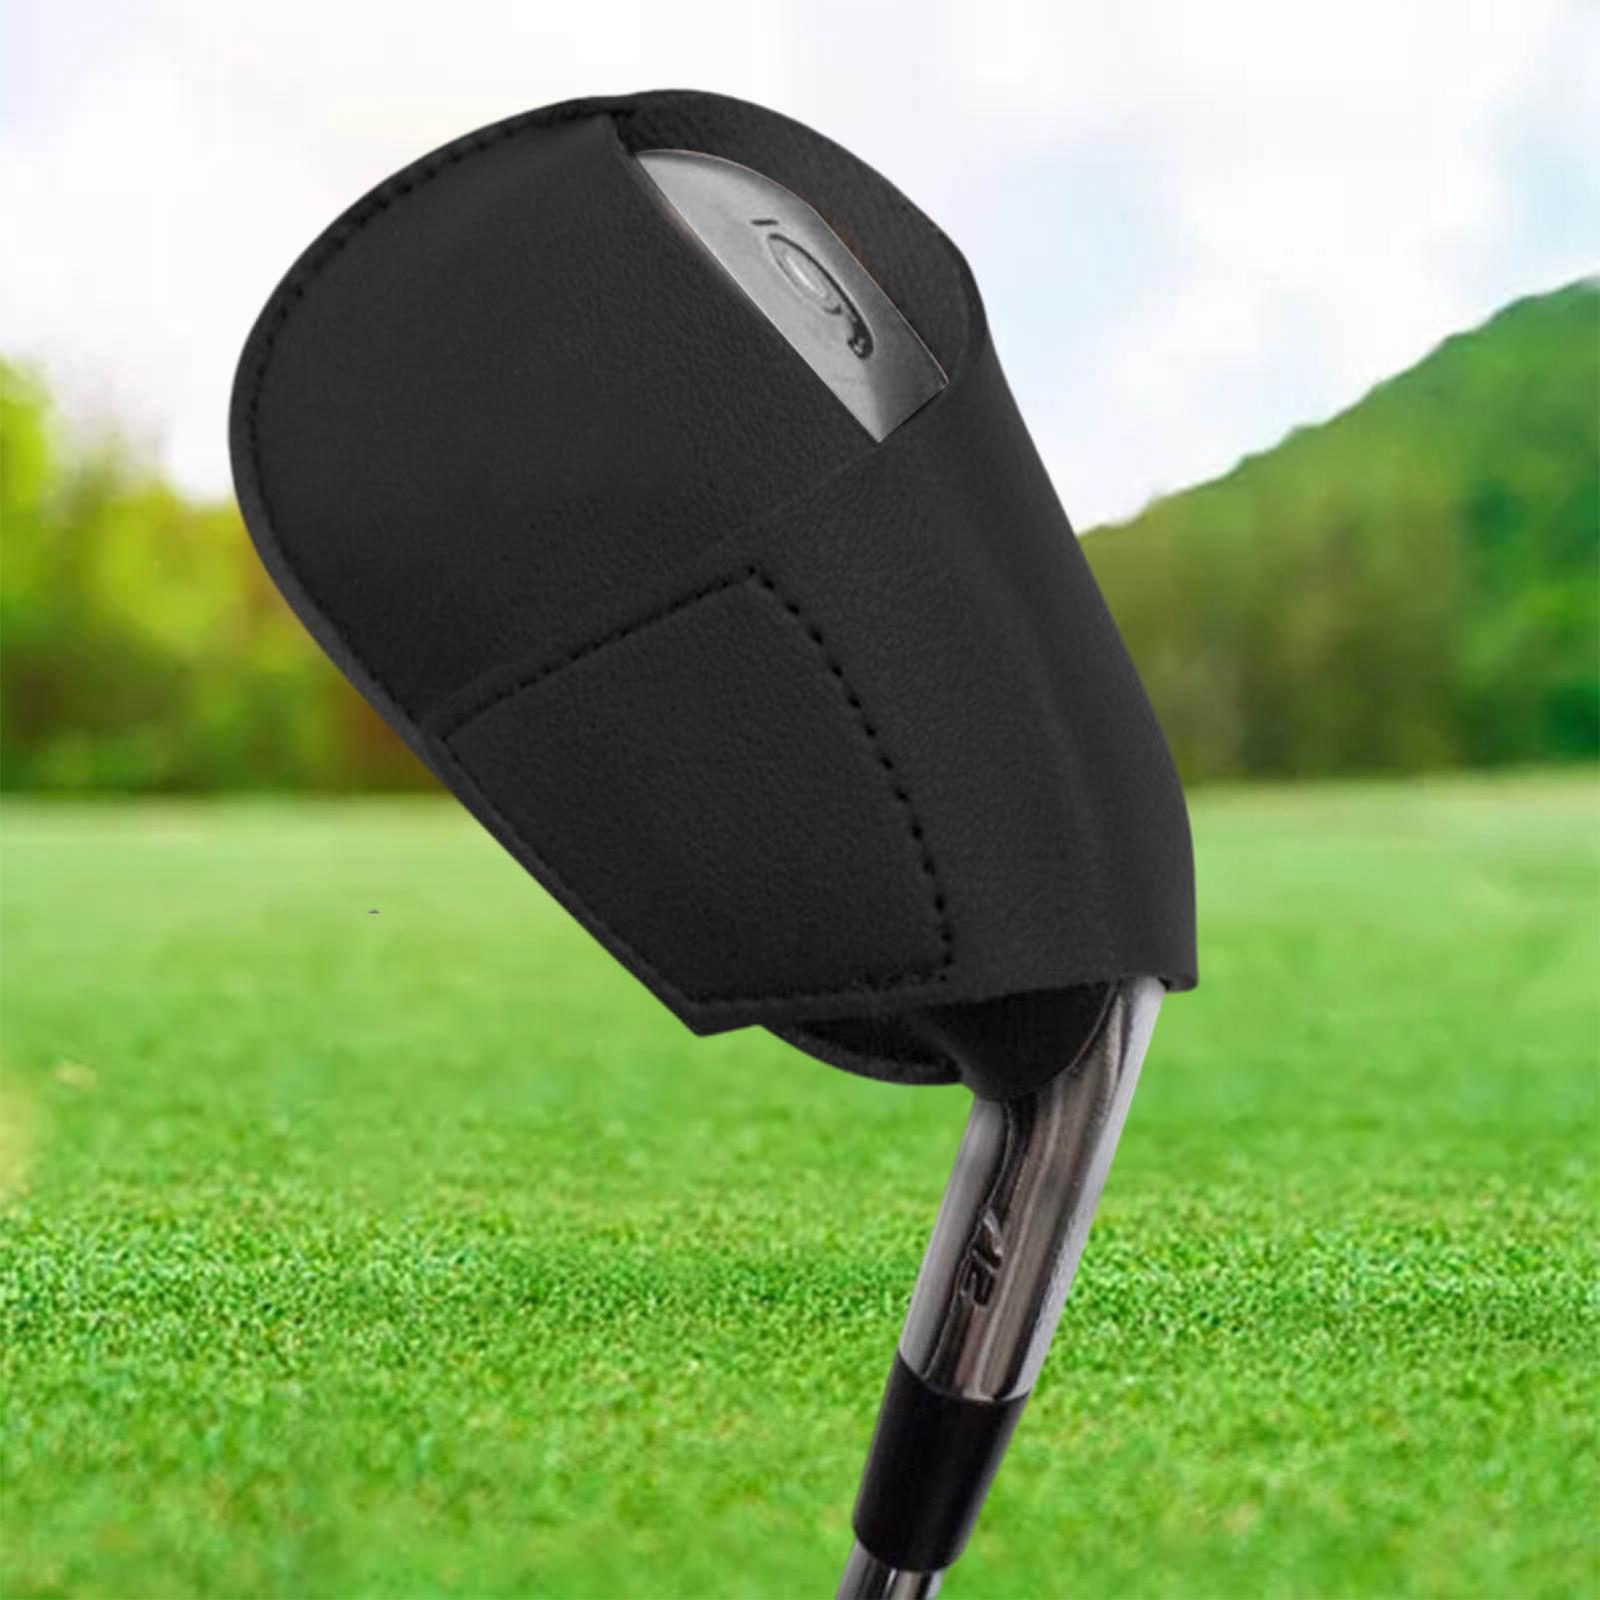 PU Leather Head Cover Protector Golf Iron Head Cover for Golf Black